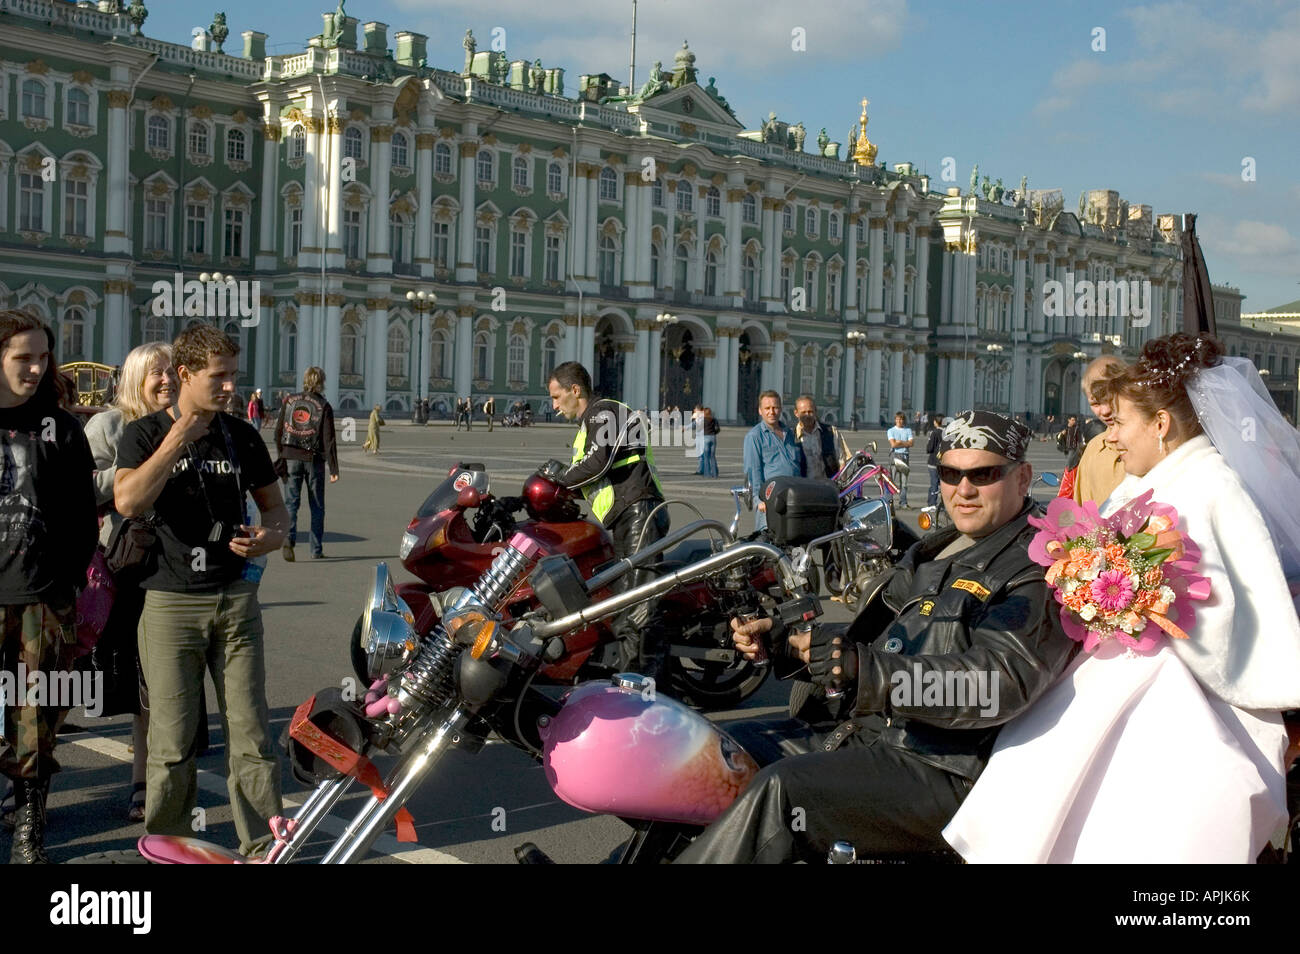 Bride and groom from a group of bikers on the Dvortsovaya Square with Hermitage Museum in background Saint Petersburg Russia Stock Photo